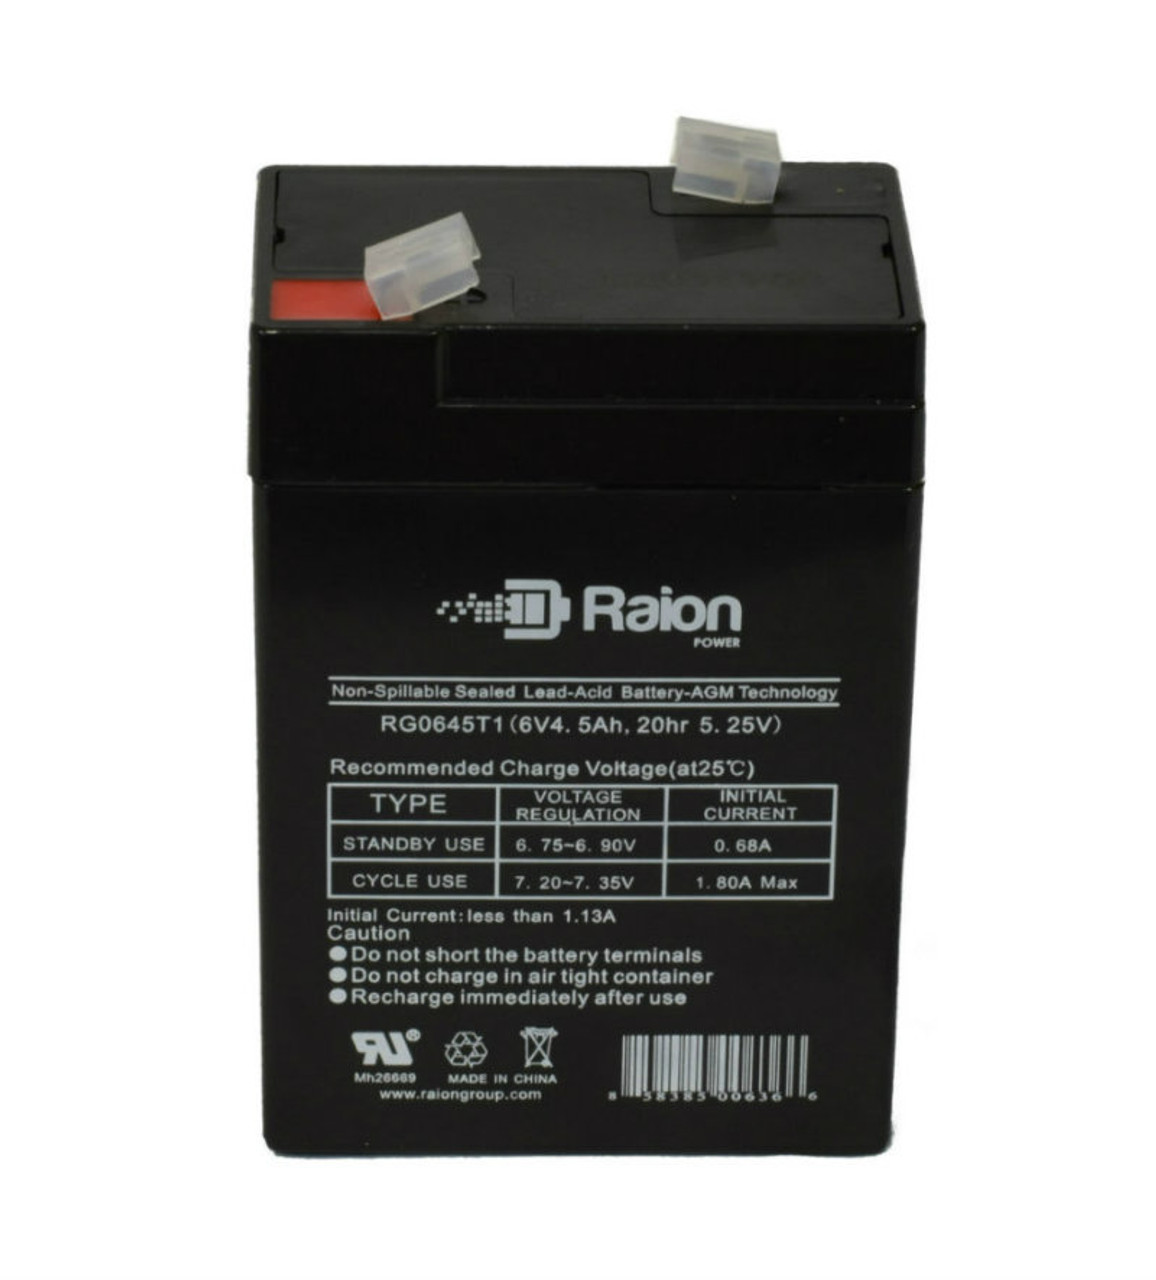 Raion Power RG0645T1 Replacement Battery Cartridge for Lithonia AQM EL